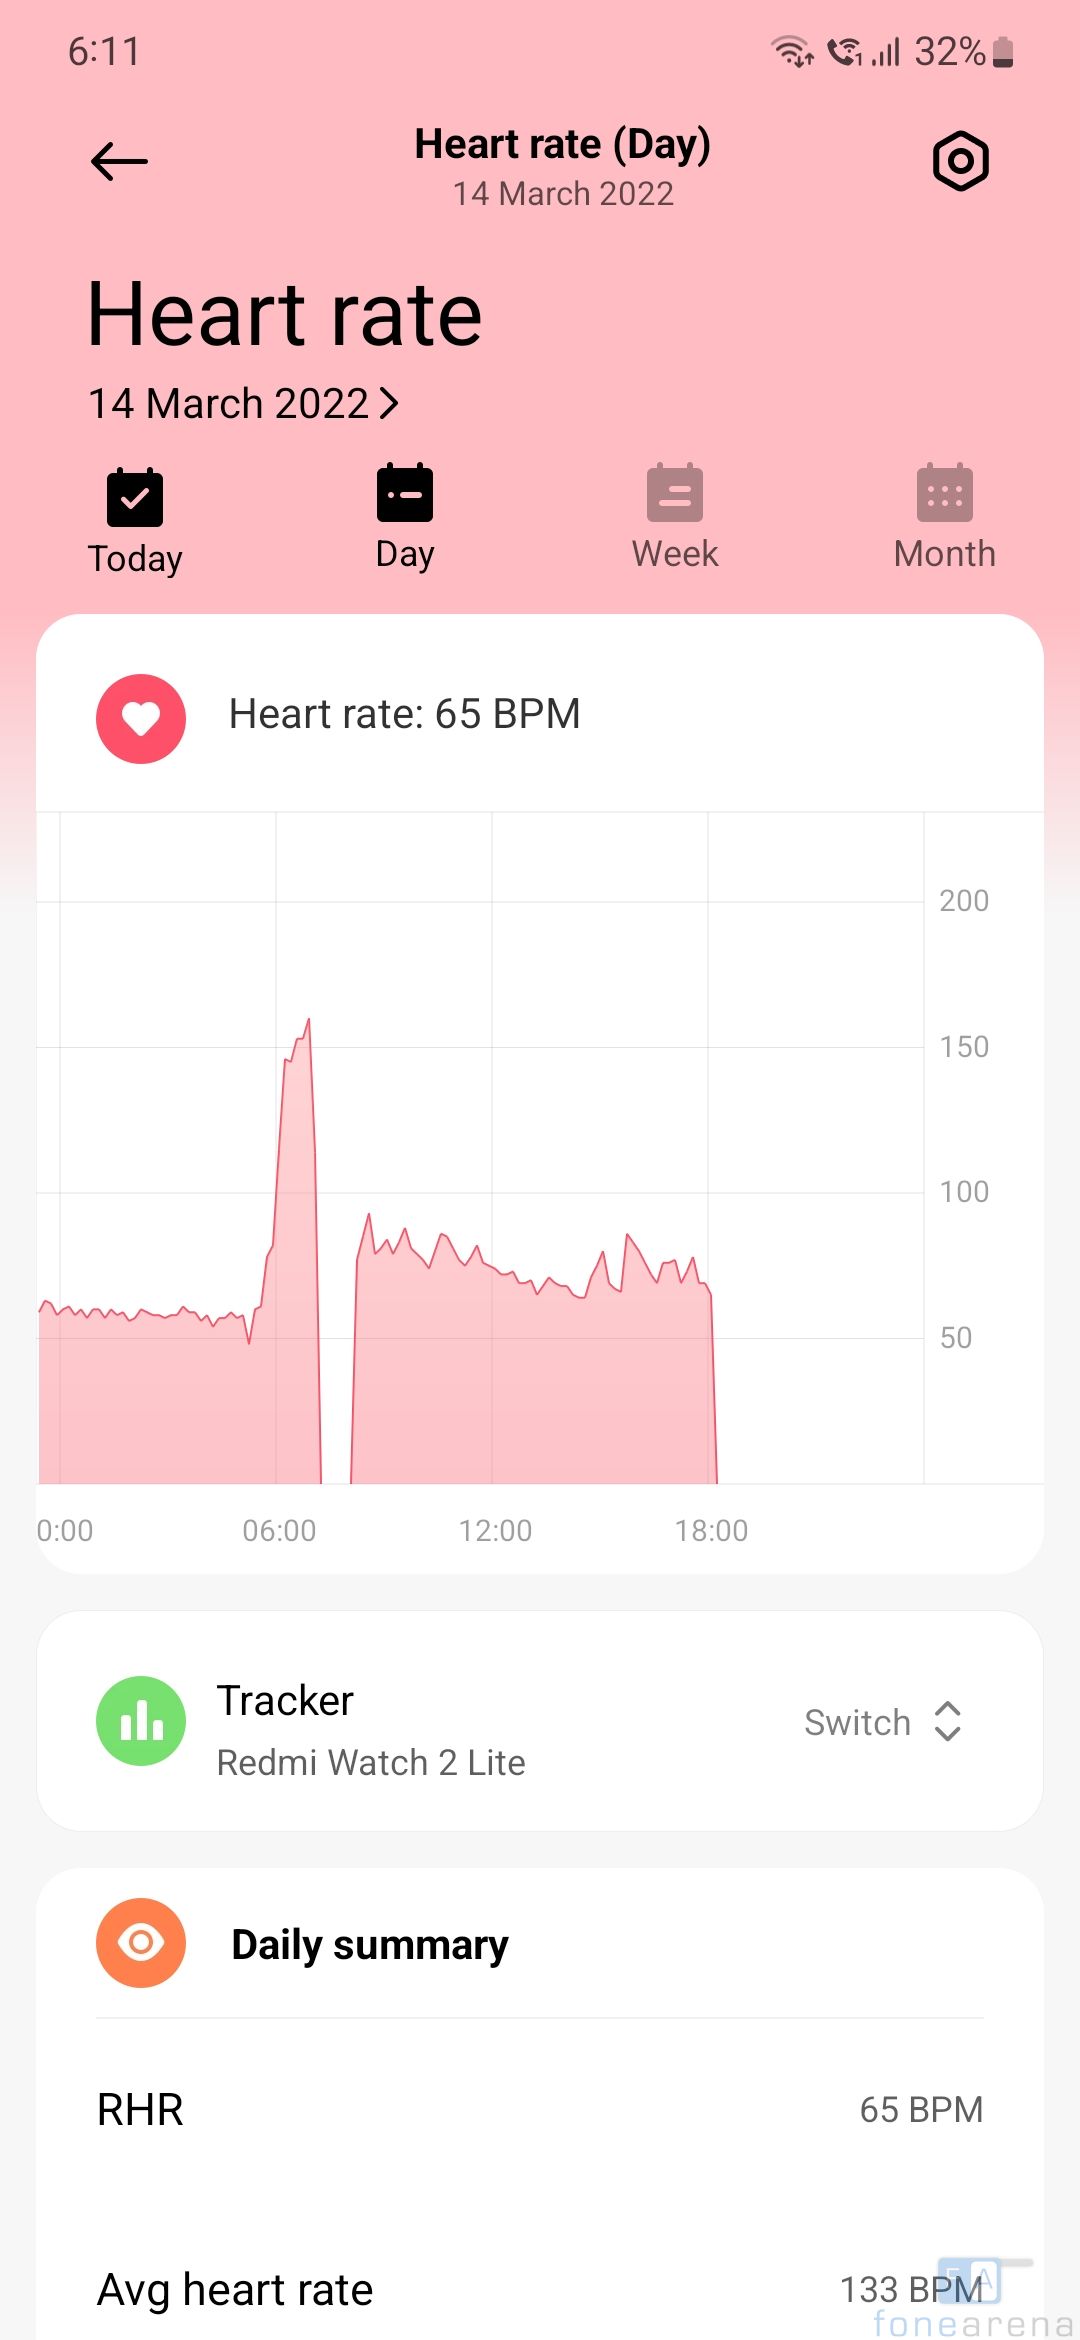 Mi Watch Lite 2 Weeks Later: How Accurate Is It?? (GPS, Heart Rate